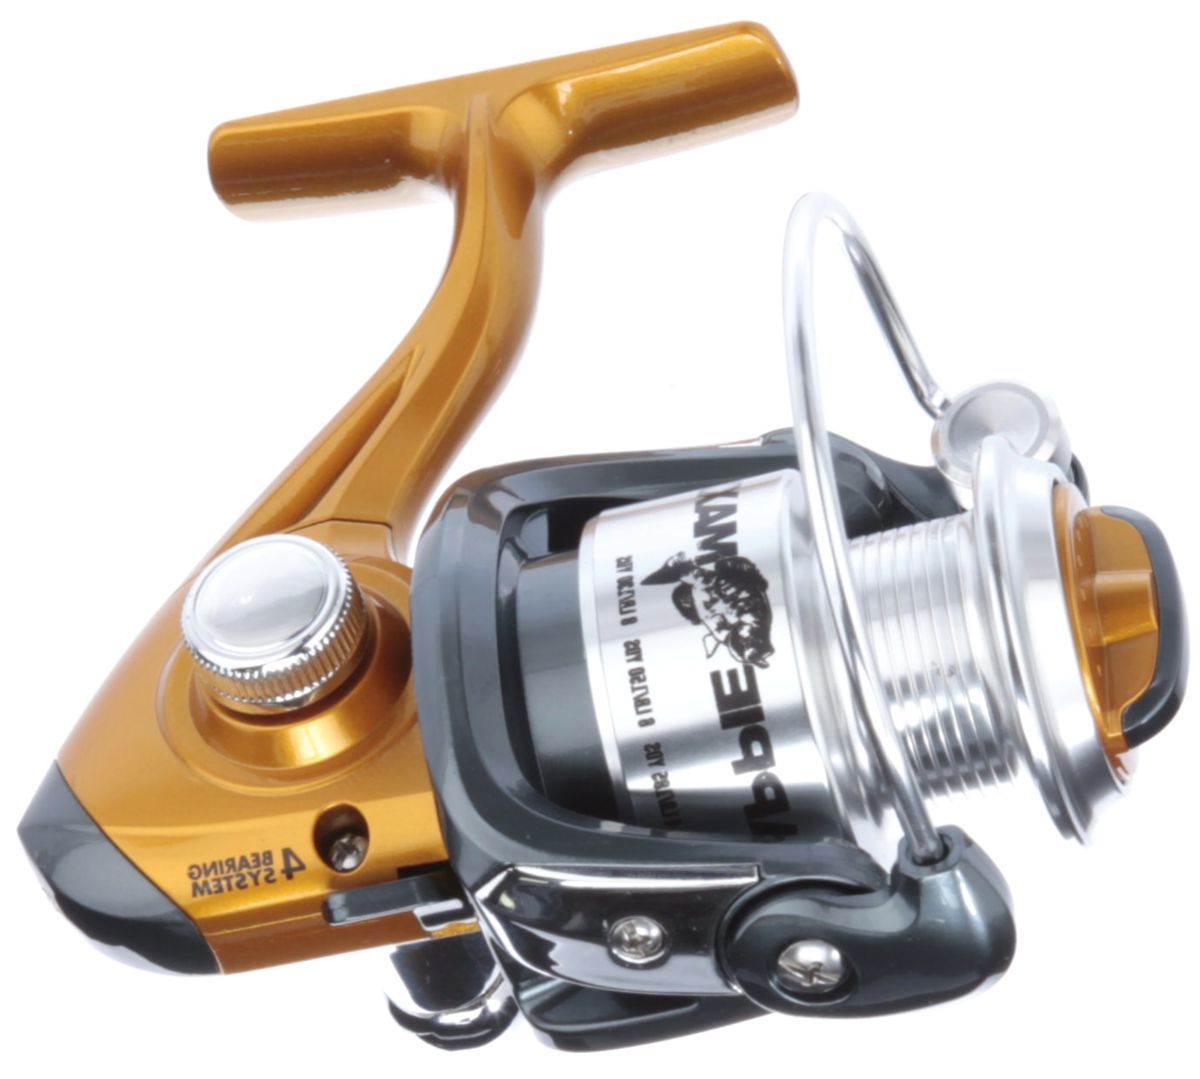 Bass Pro Shops® Crappie Maxx® Spinning Reel